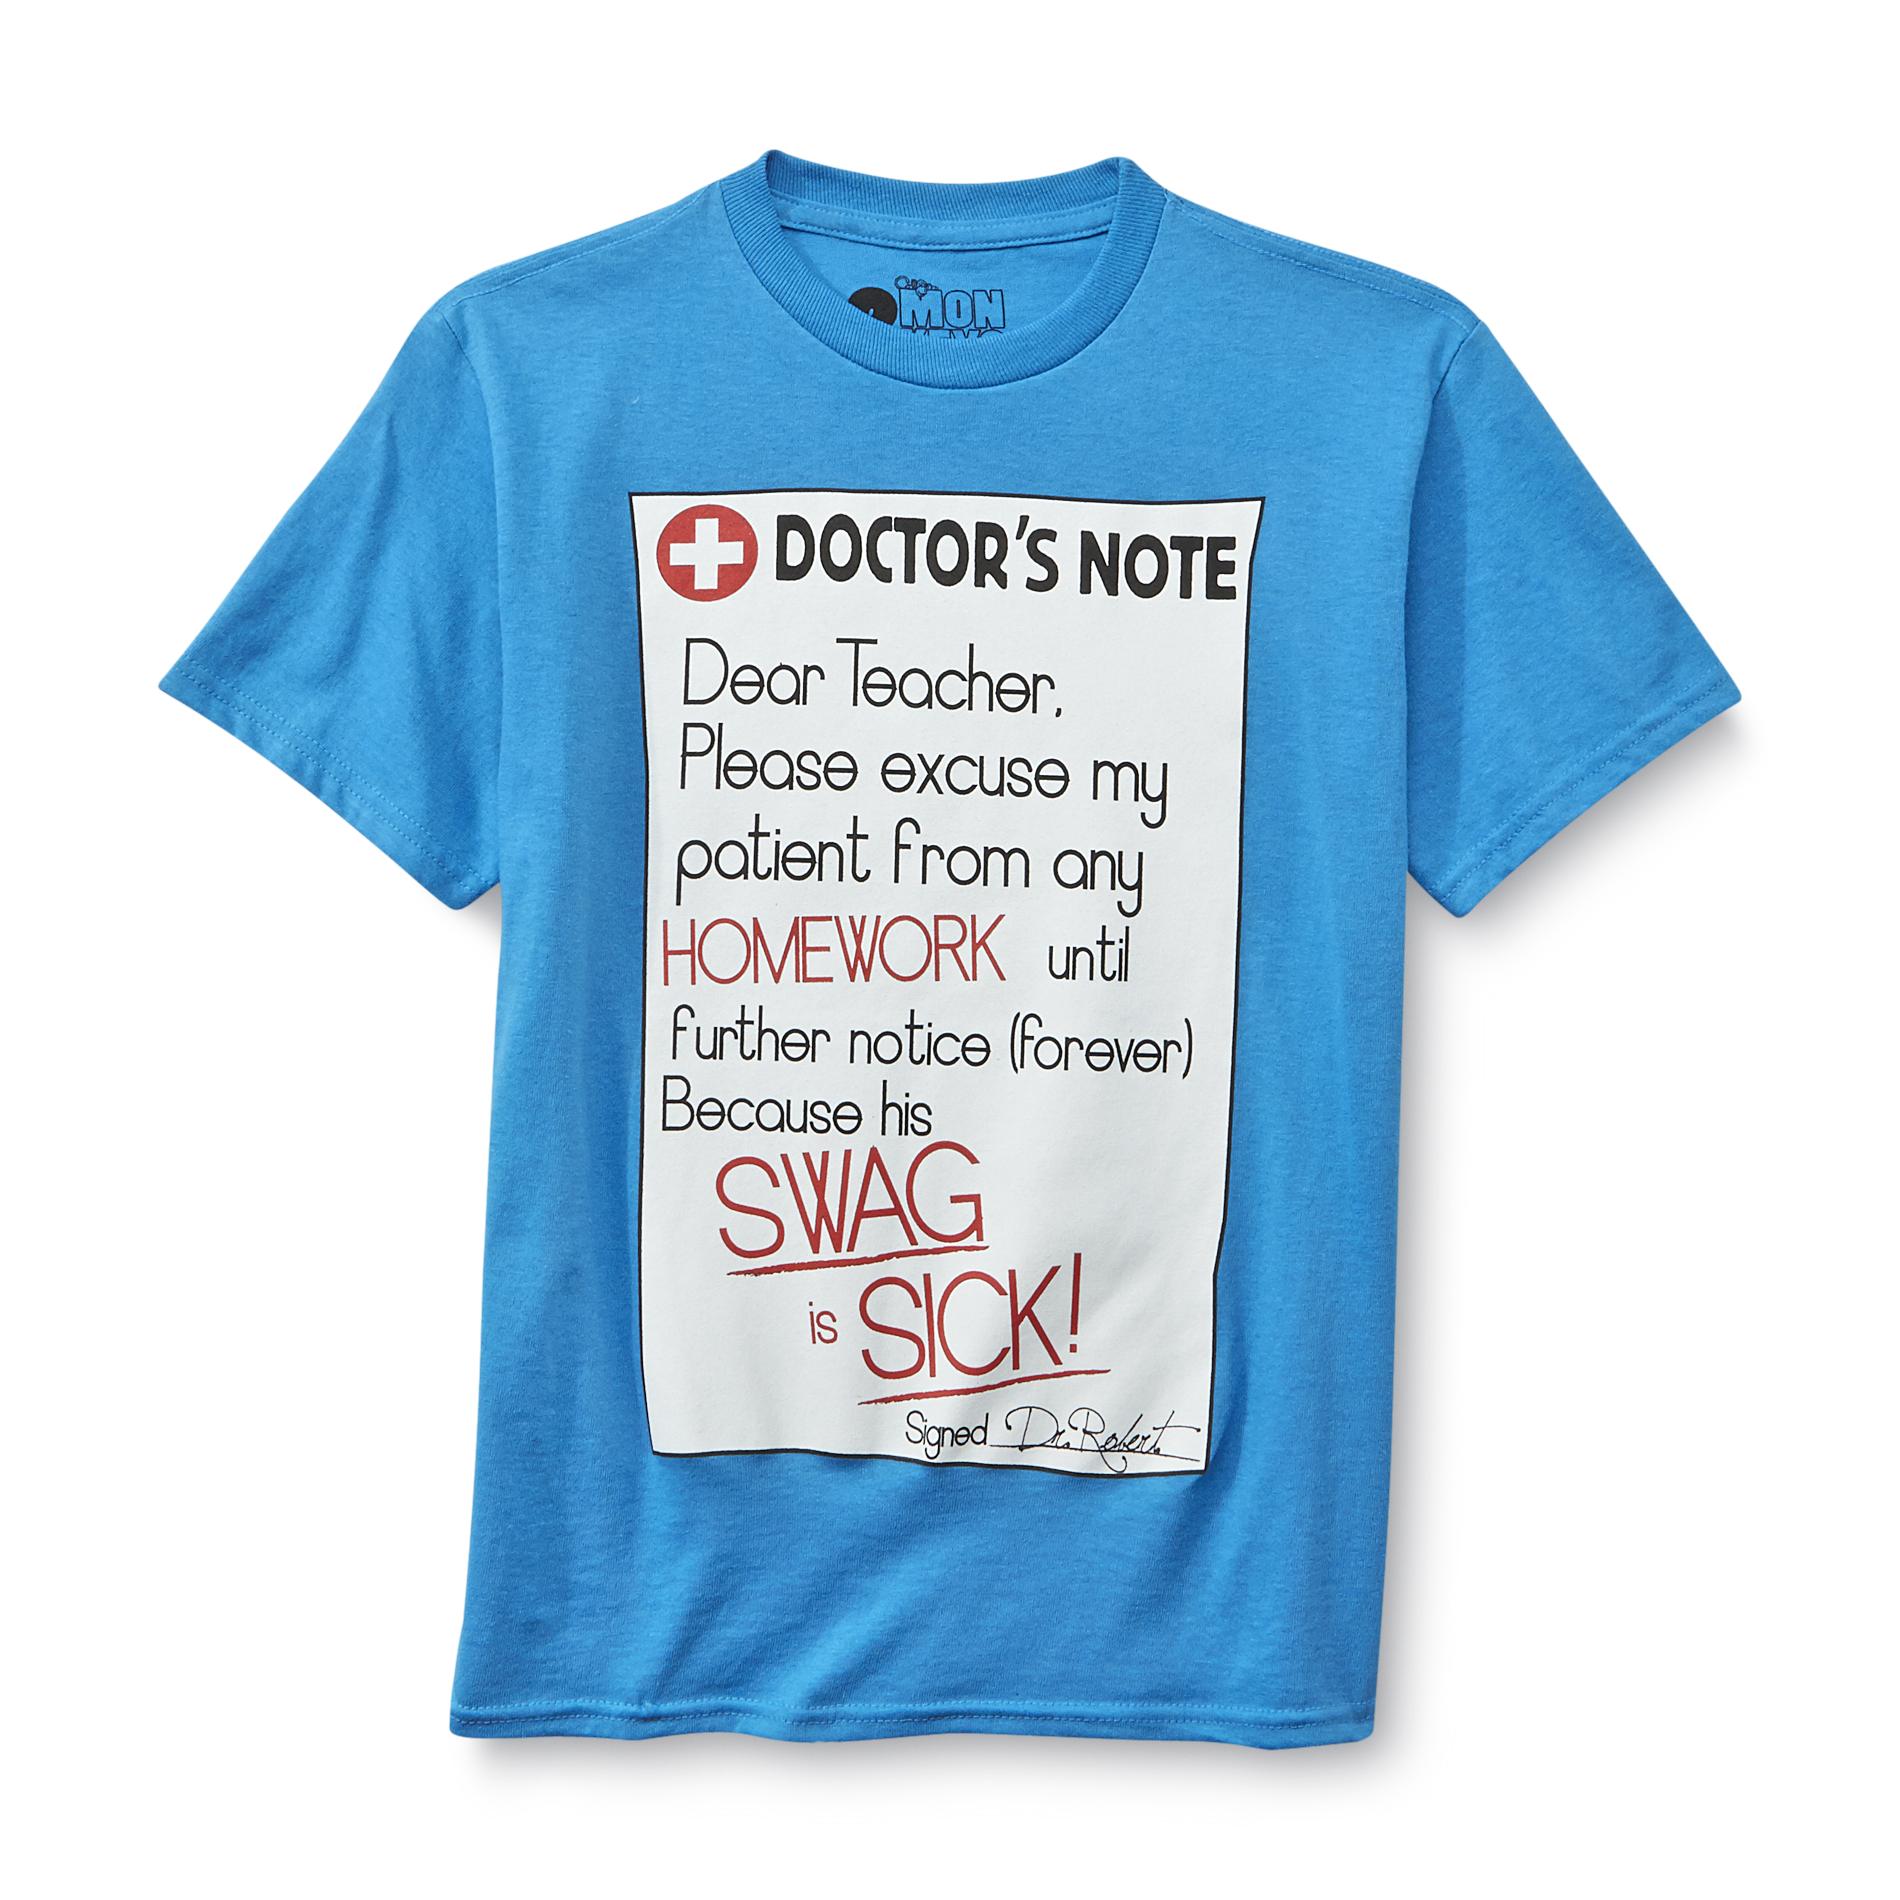 2 Monkeys Boy's Graphic T-Shirt - Doctor's Note